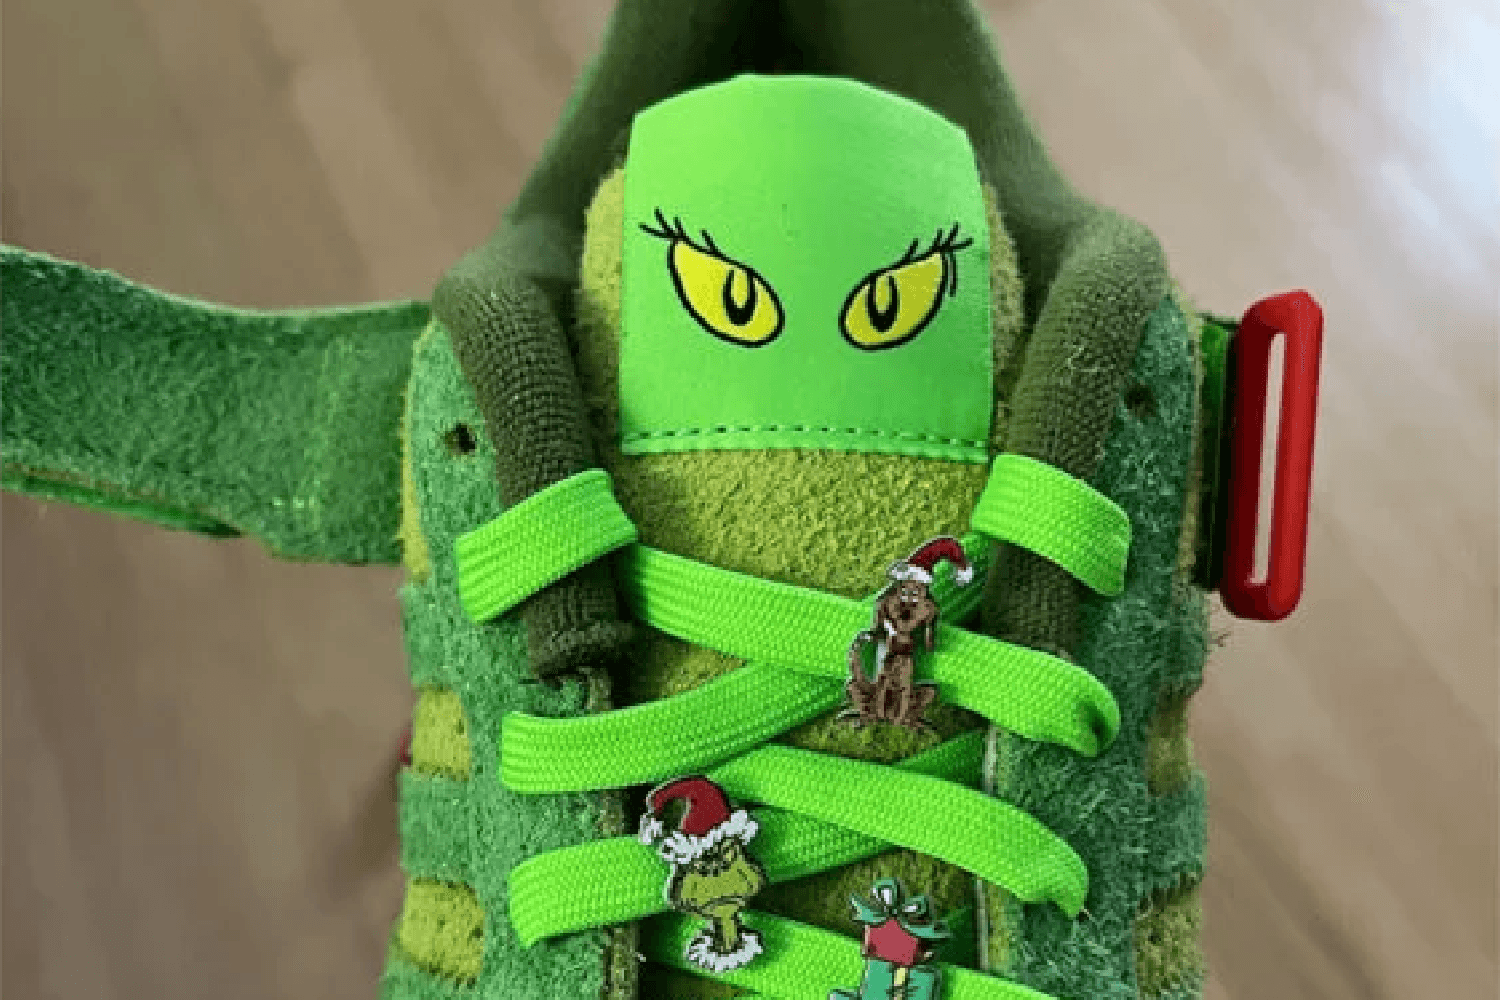 adidas arrives with iconic Grinch x adidas Forum